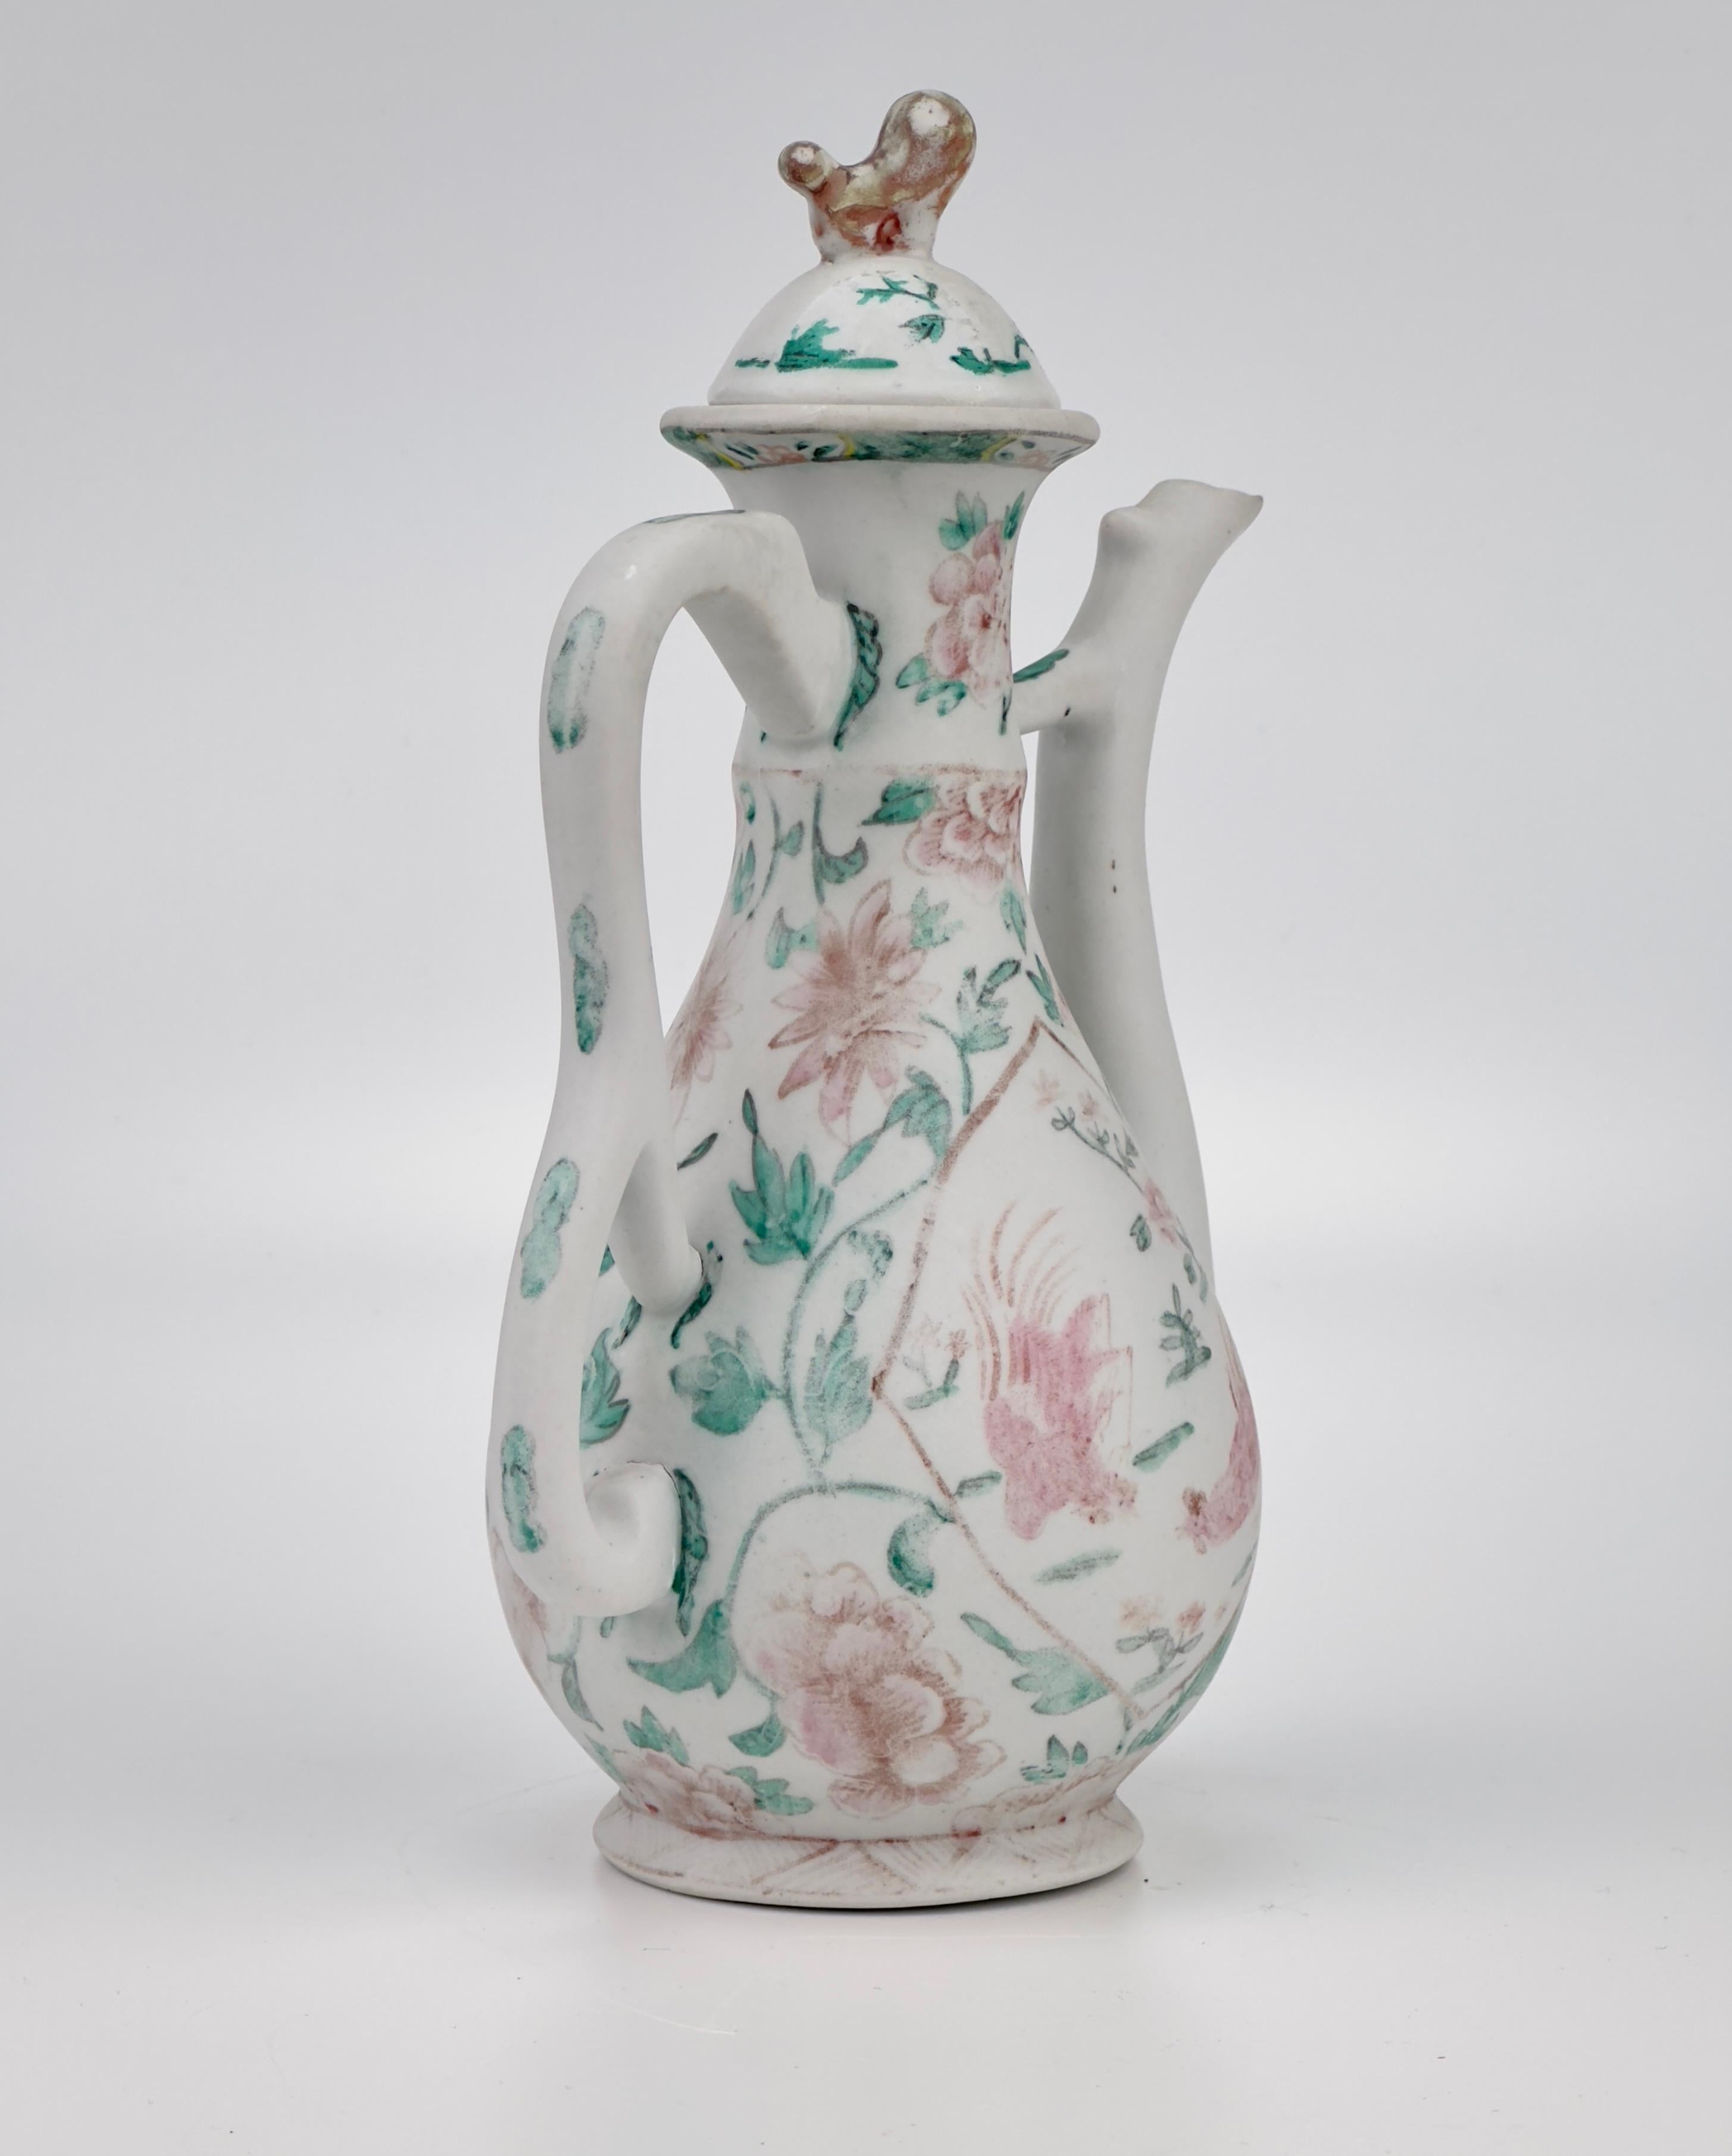 Beautiful 'chickens and flowers' painted familie rose/verte ceramic ewer from Qing dynasty. Excavated from cargo underwater.

This piece is from the early Qing dynasty, and it is not clear whether it is from the Yongzheng era or the Kangxi era.